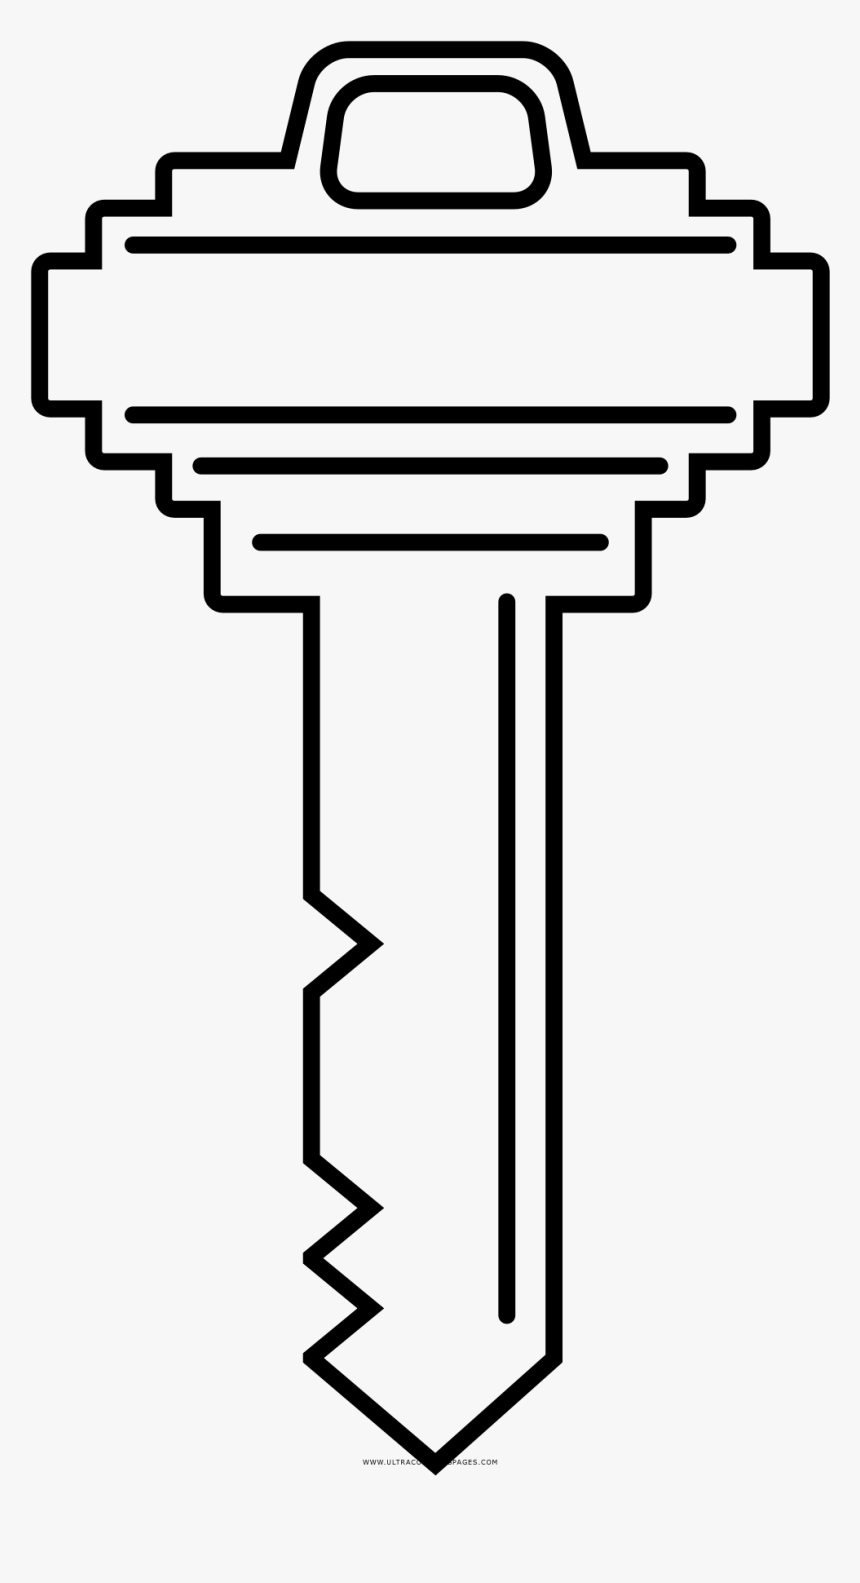 House Key Coloring Page - Sports Logo